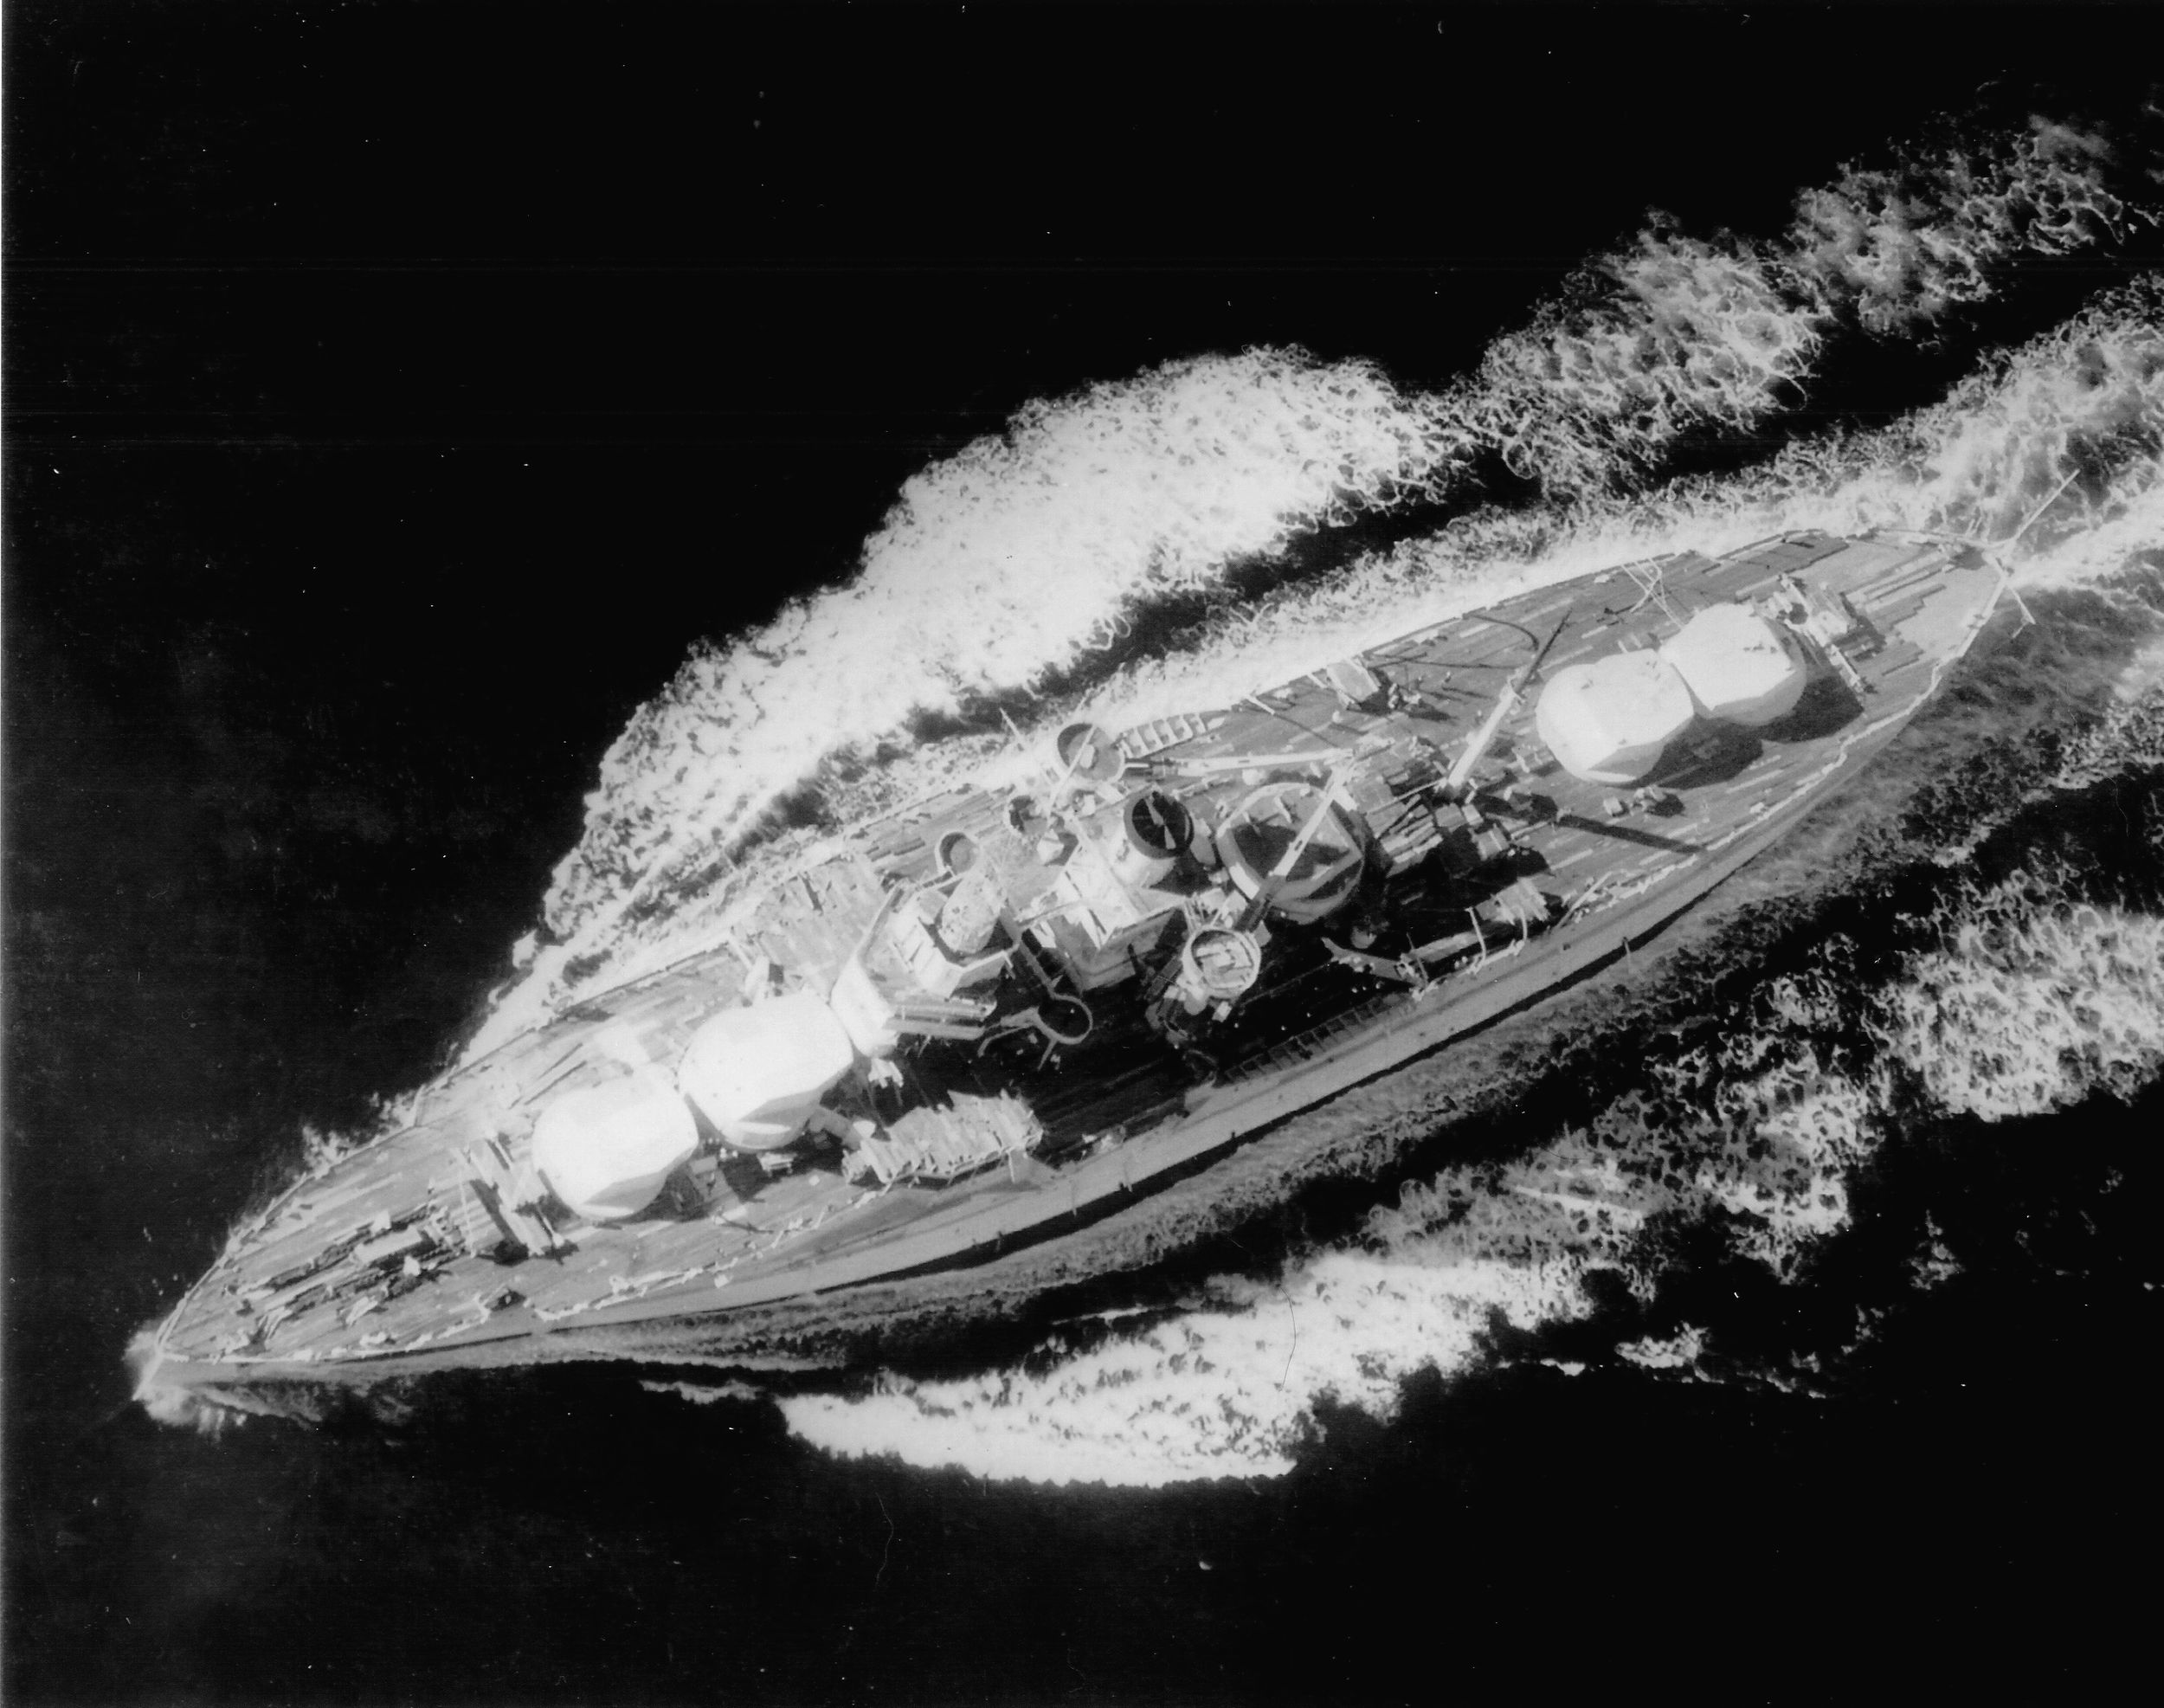 Plowing through the Pacific on December 10, 1936, the USS Utah is employed as a target ship by the navy. Her 12-inch main guns and other weaponry have been removed.